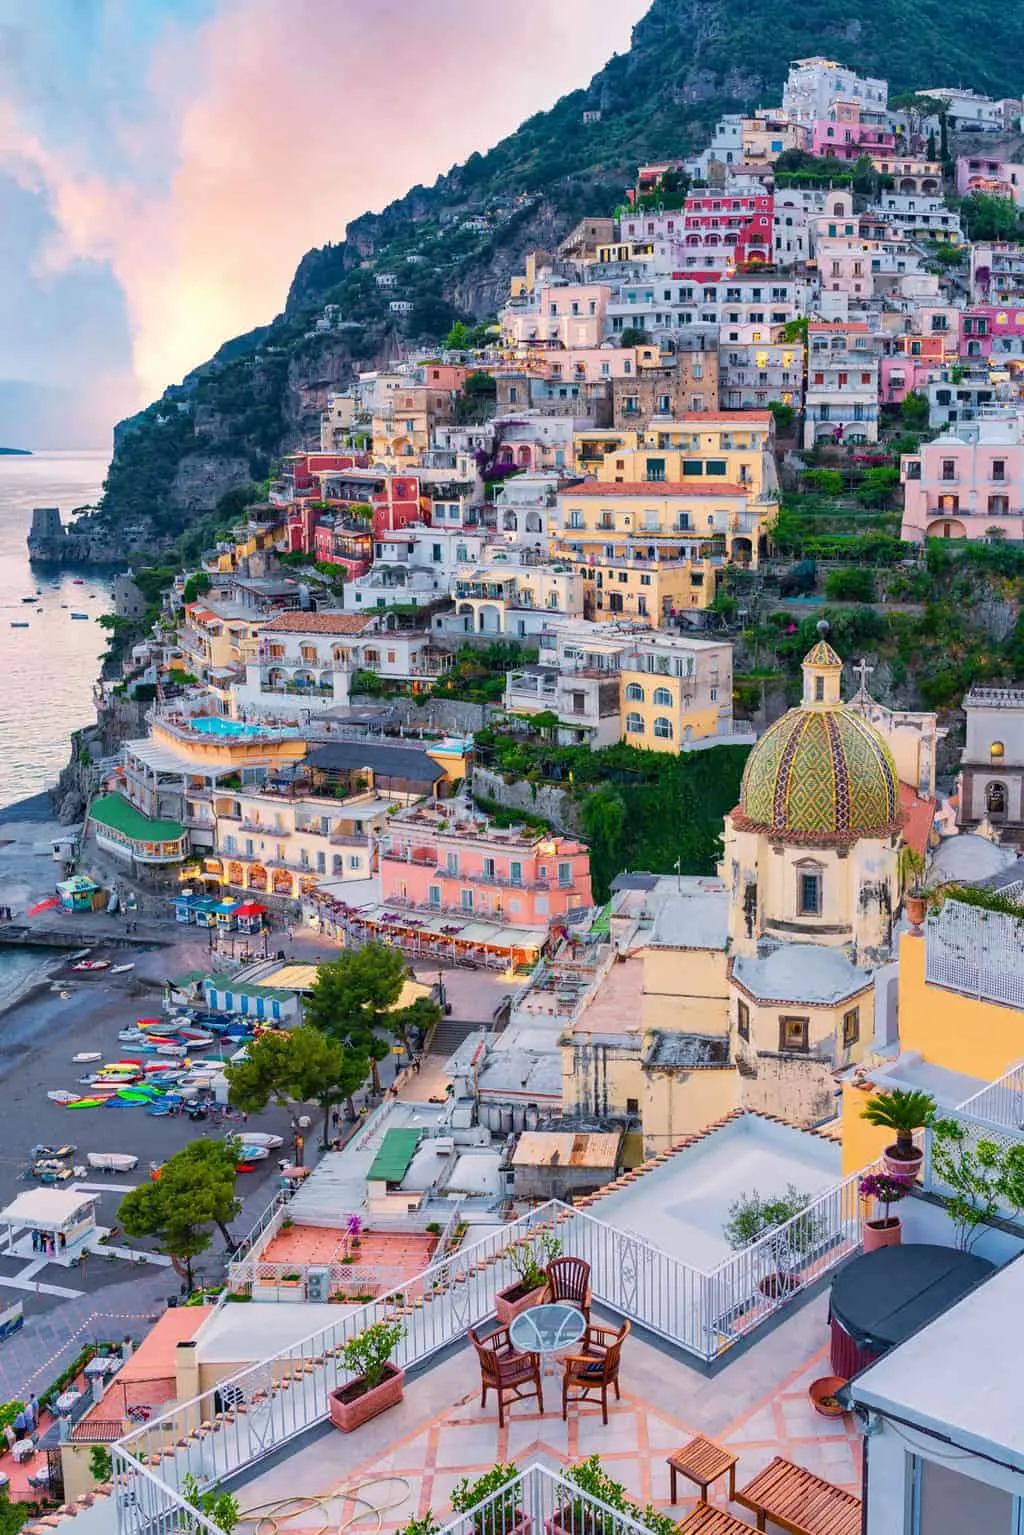 Pastel coloured building cascade down the hill at dusk in Positano on the Amalfi Coast.